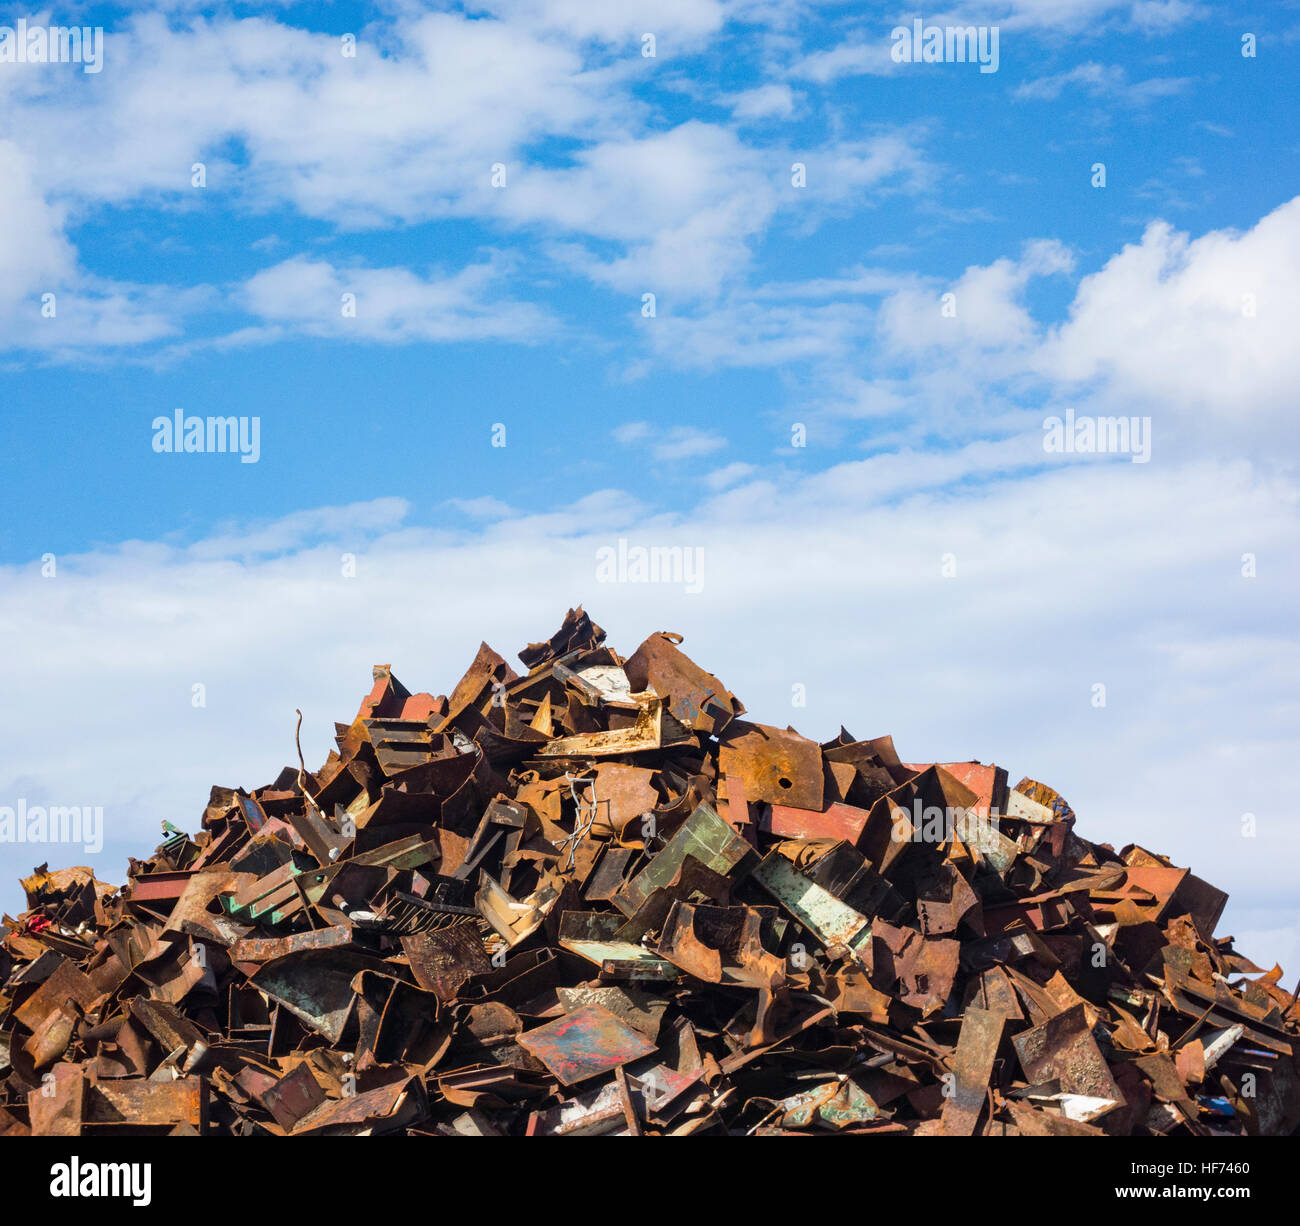 Scrap metal from ship broken up for recycling in port scrapyard in Spain Stock Photo